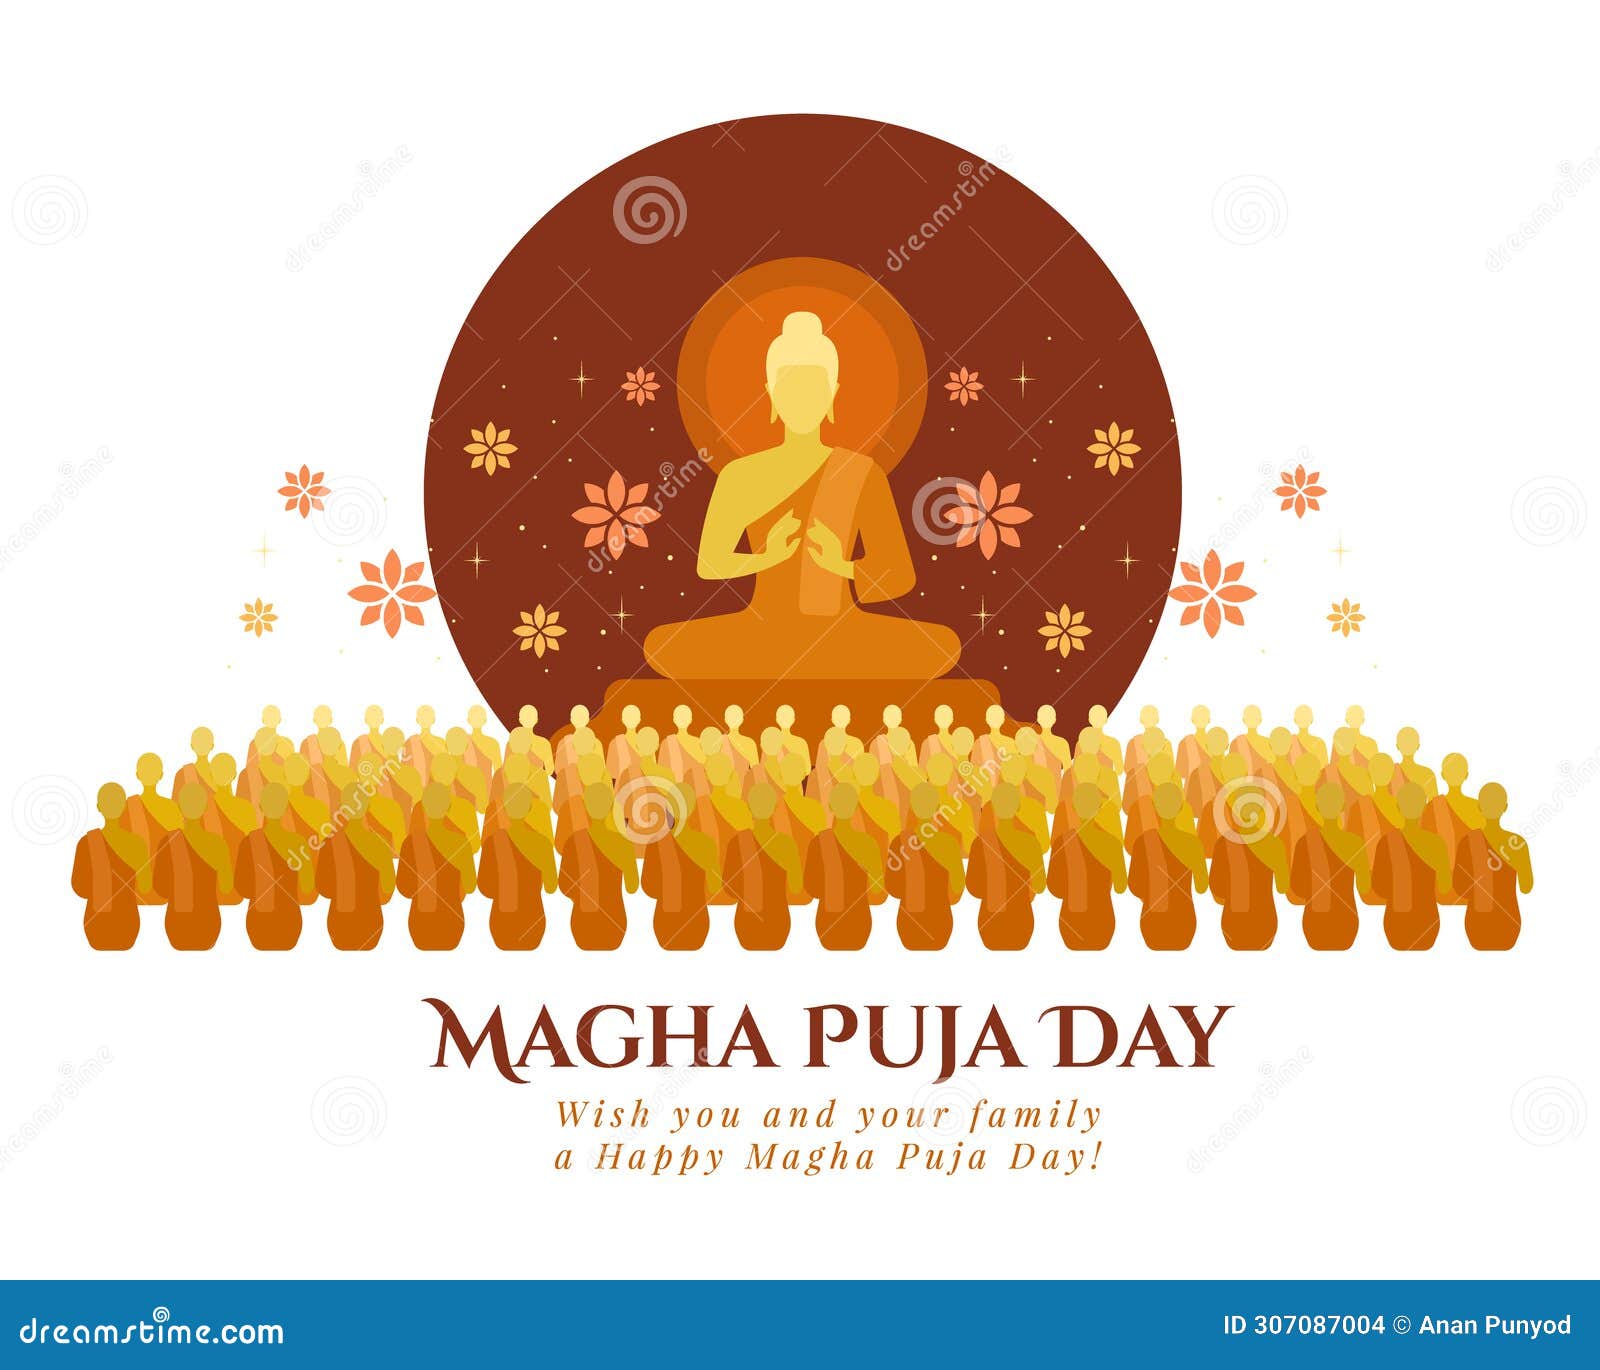 magha puja day - the lord buddha giving and preach 1250 monks in full moon night with lotus flower around  